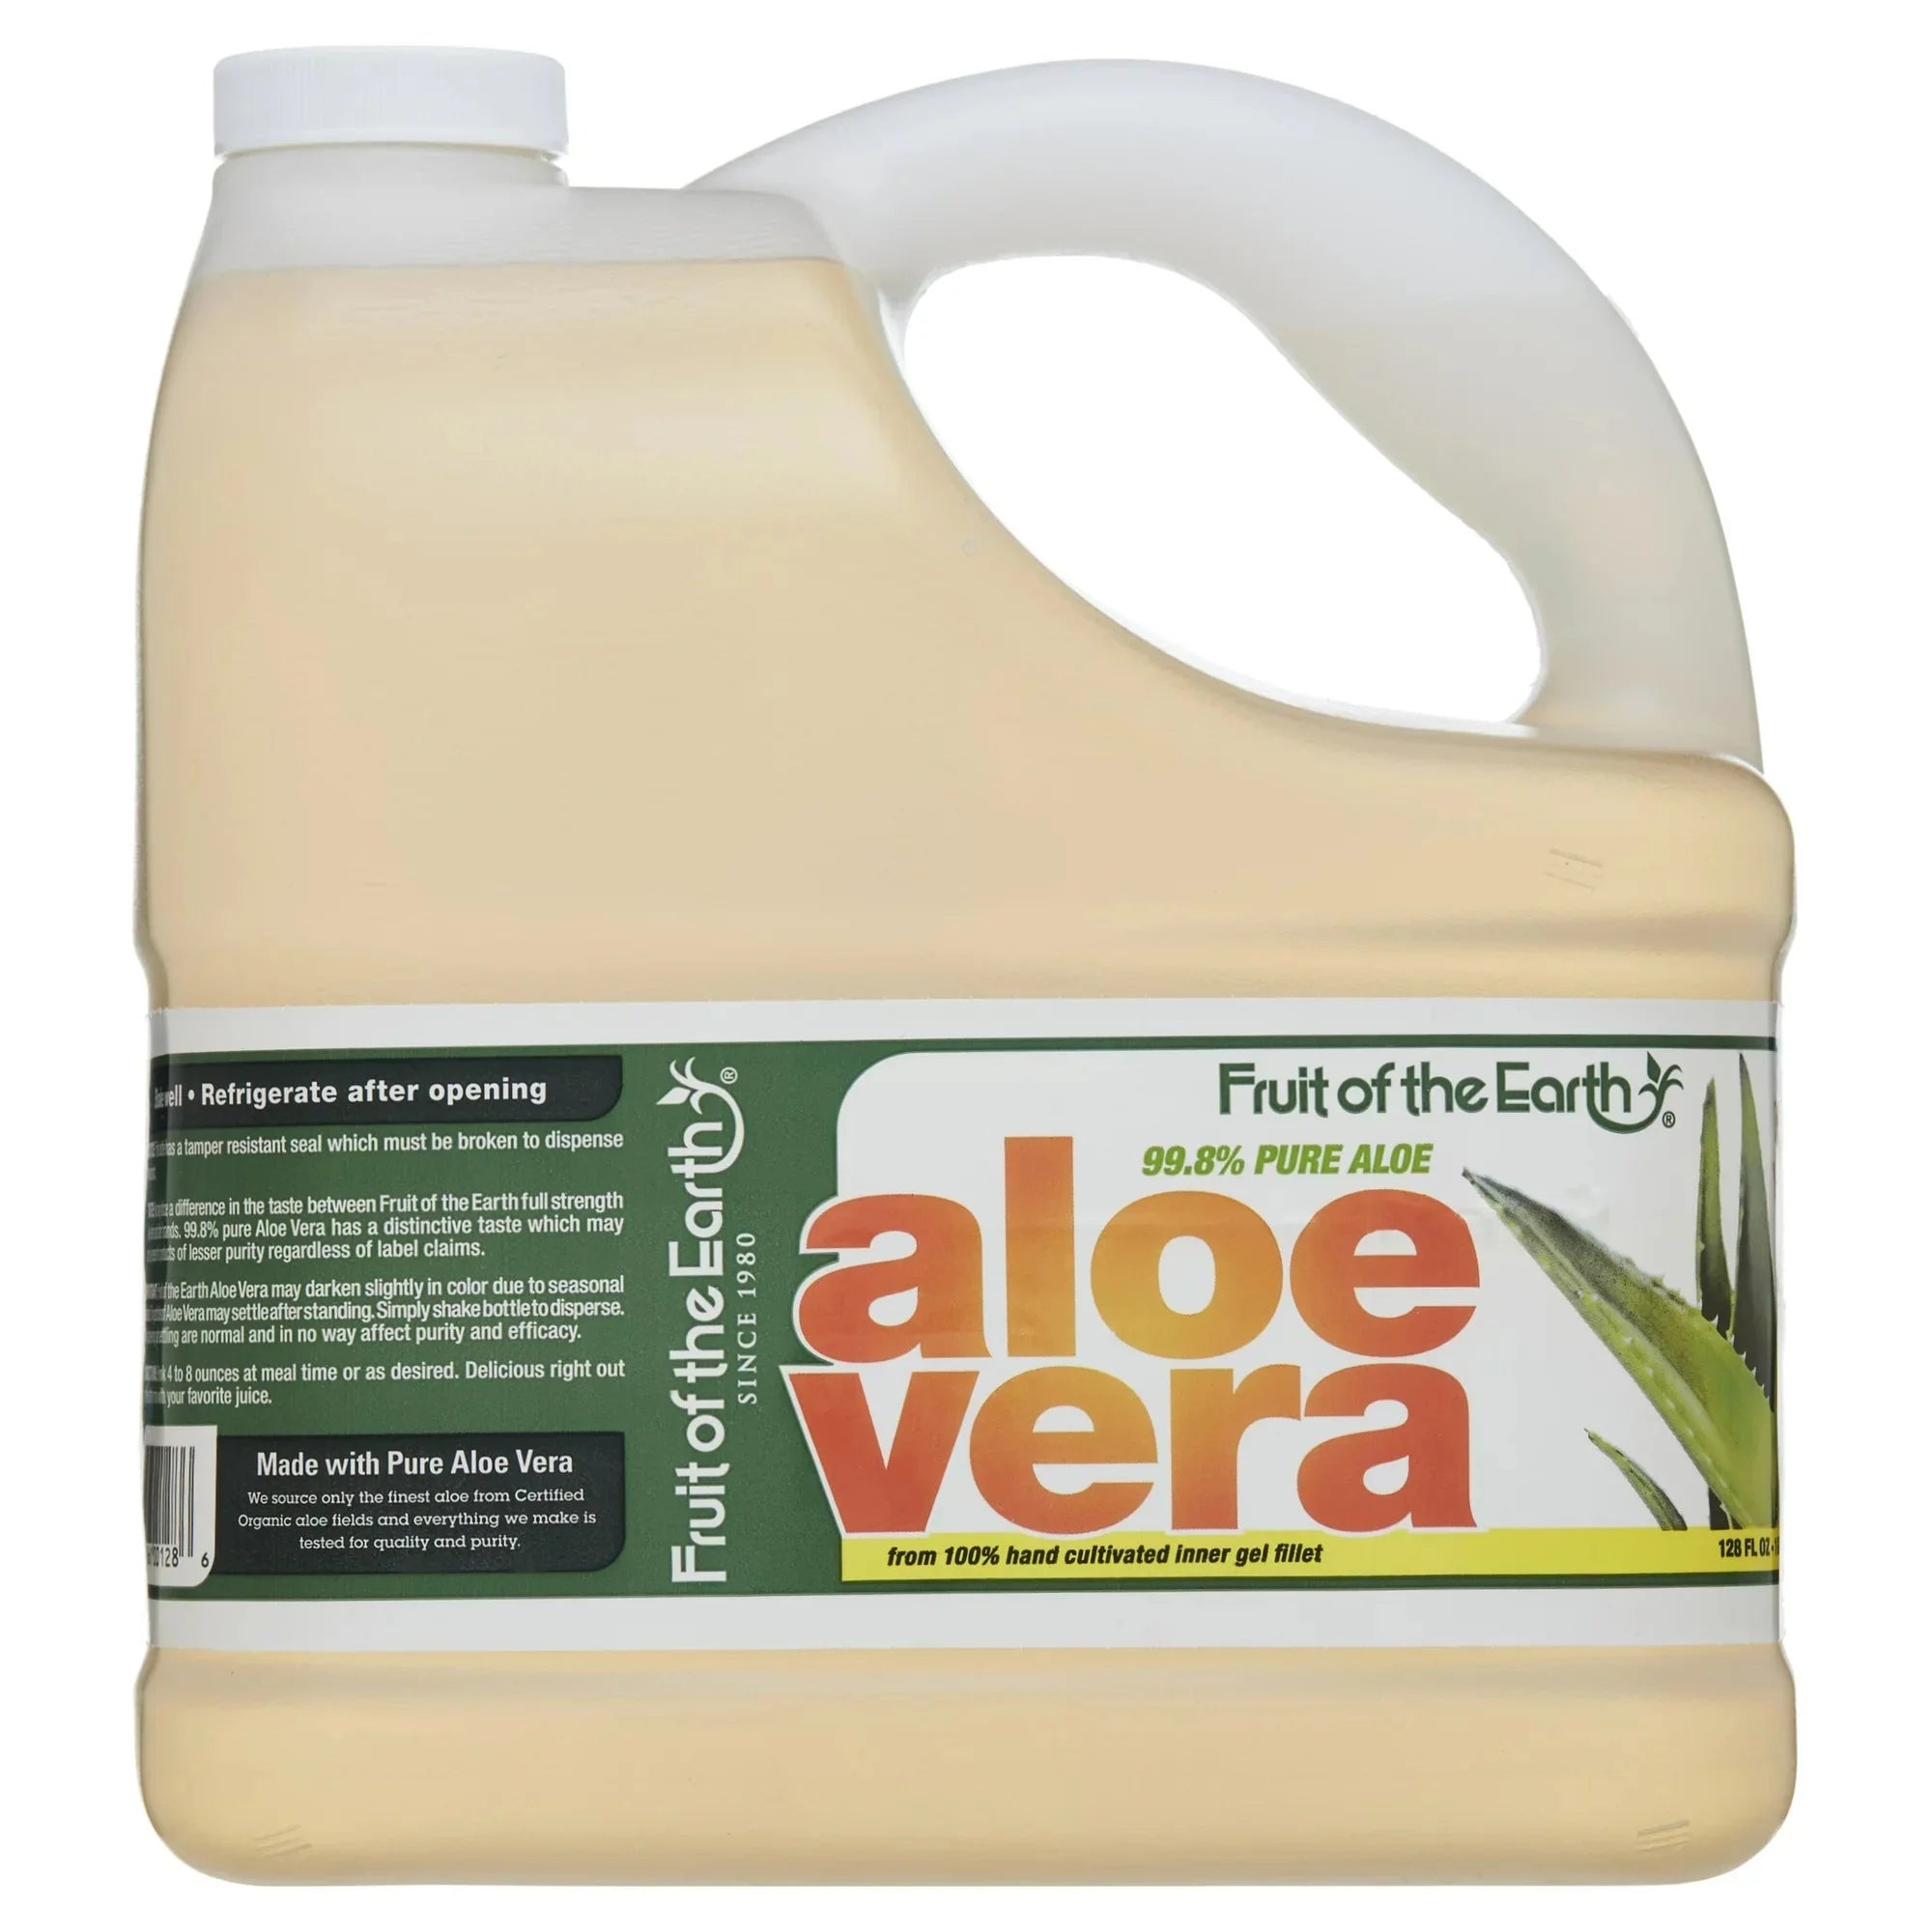 Wholesale prices with free shipping all over United States Fruit of the Earth Health & Wellness Aloe Vera Drink, 128 fluid ounces - Steven Deals